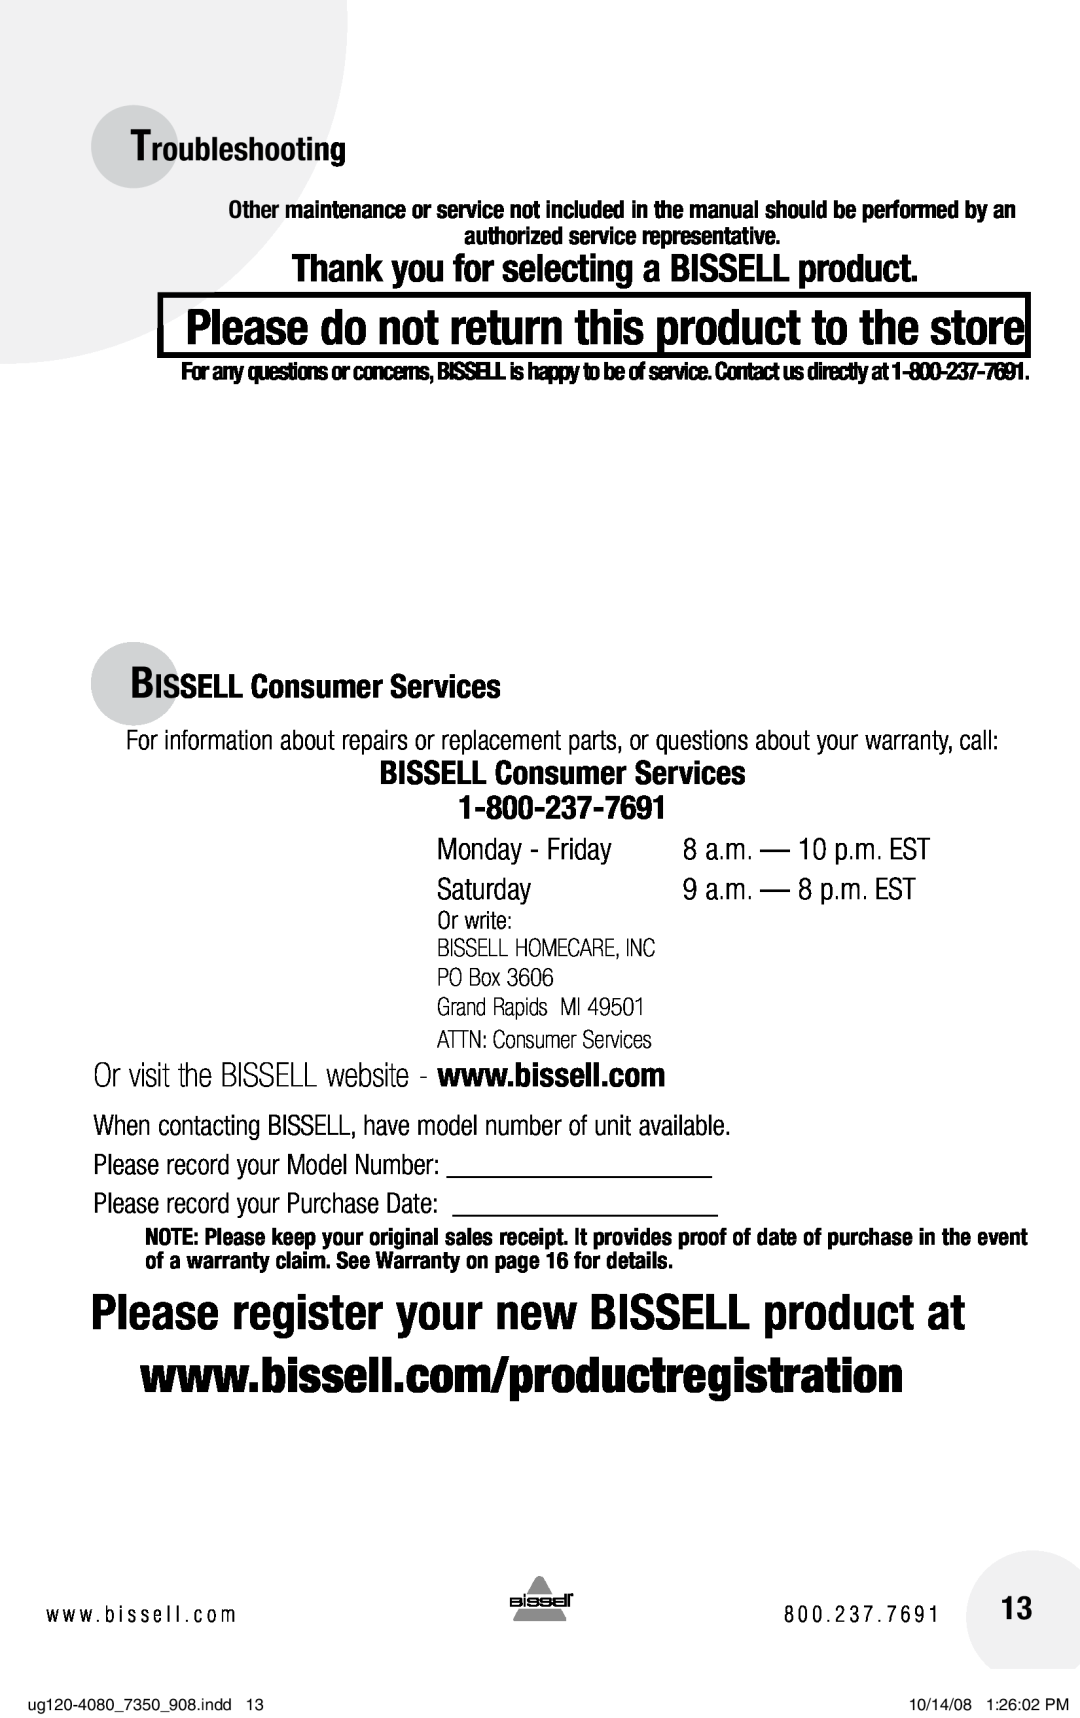 Bissell 8350 BISSELL Consumer Services, Please do not return this product to the store, Troubleshooting, Monday - Friday 